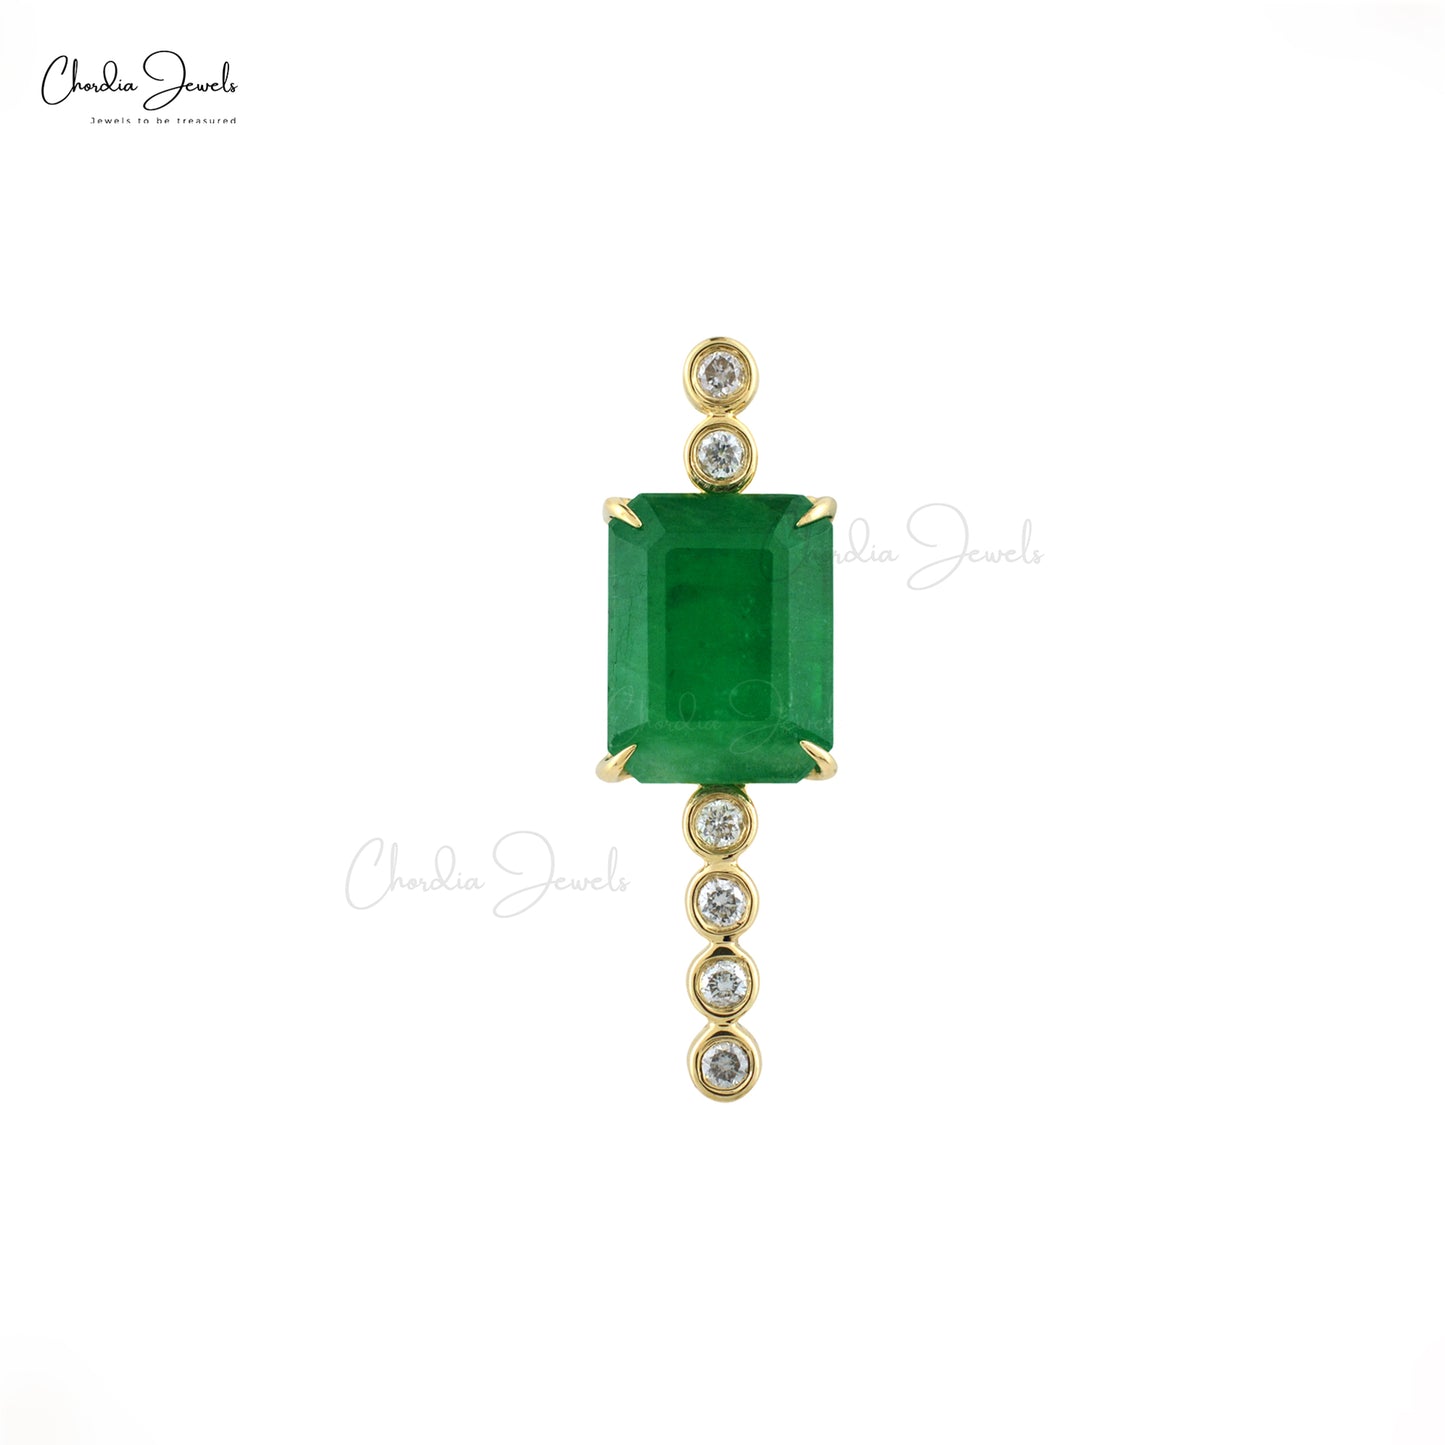 Dainty Pendant With Emerald & Diamond Accents 14k Yellow Gold Solitaire Pendant For Gift